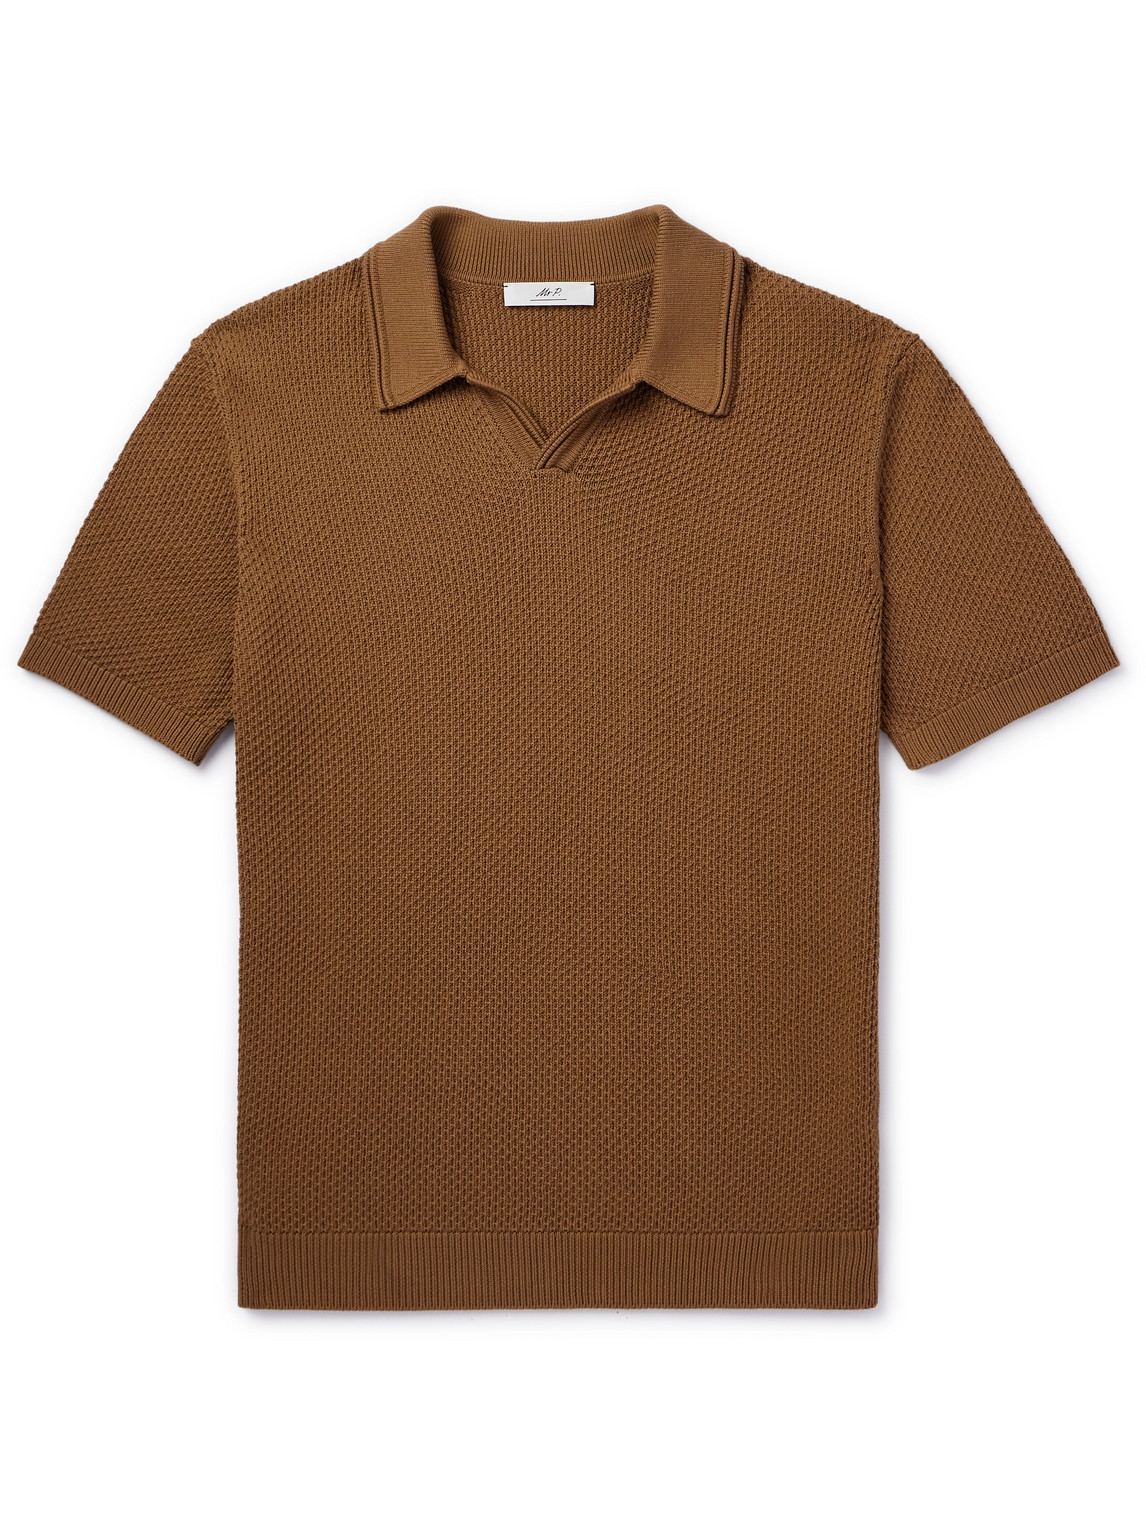 Mr P Knitted Cotton Polo Shirt In Brown